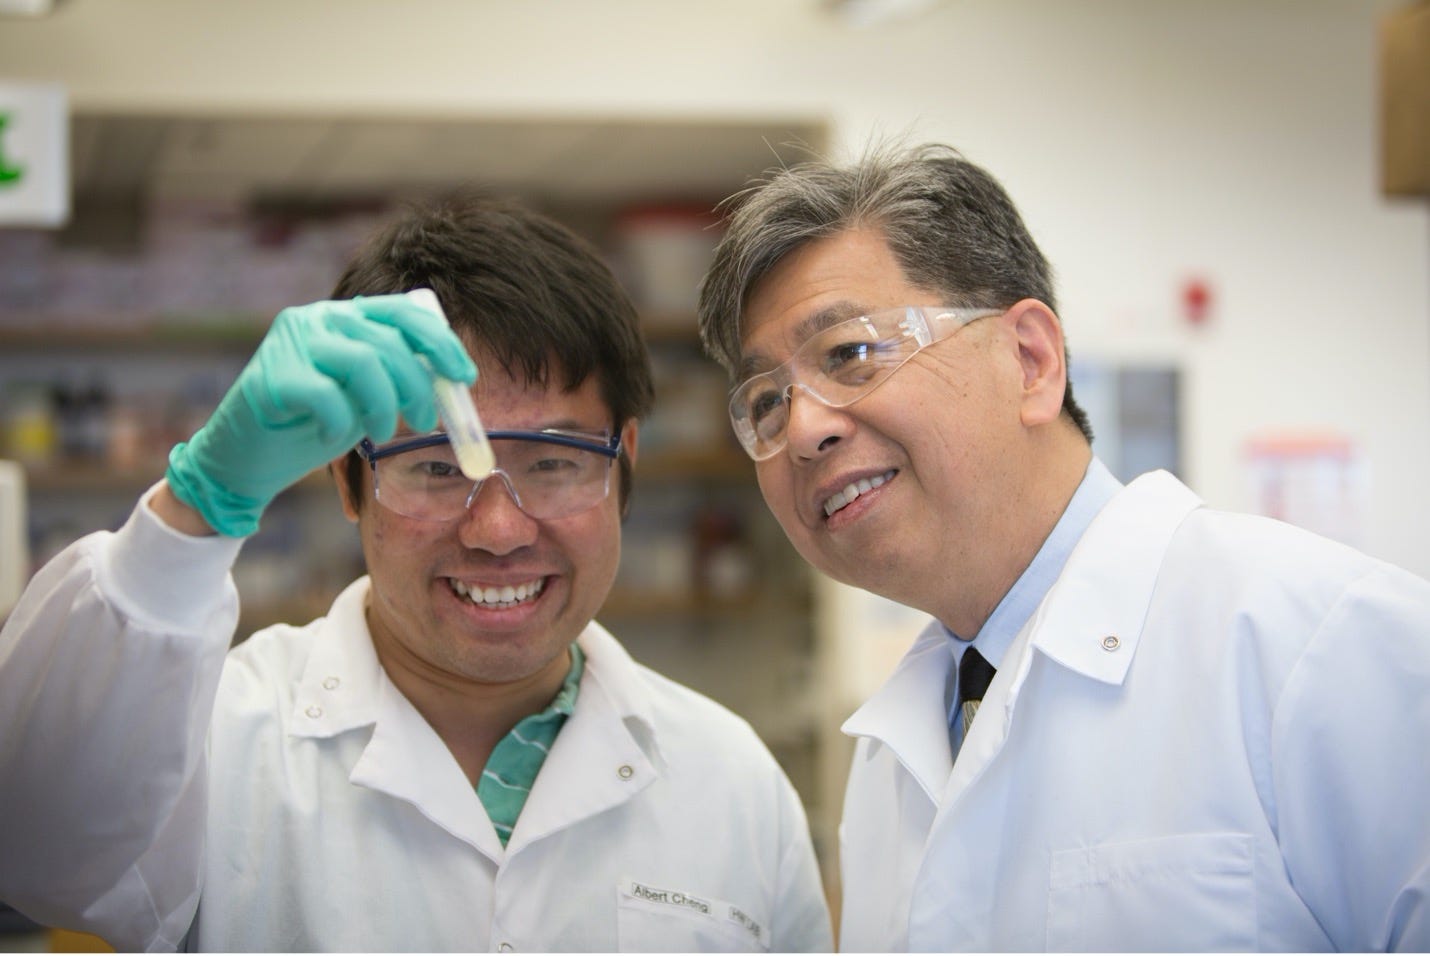 Dr. Ed Liu, right, is president and CEO of the Jackson Laboratory, a nonprofit biomedical research institution.